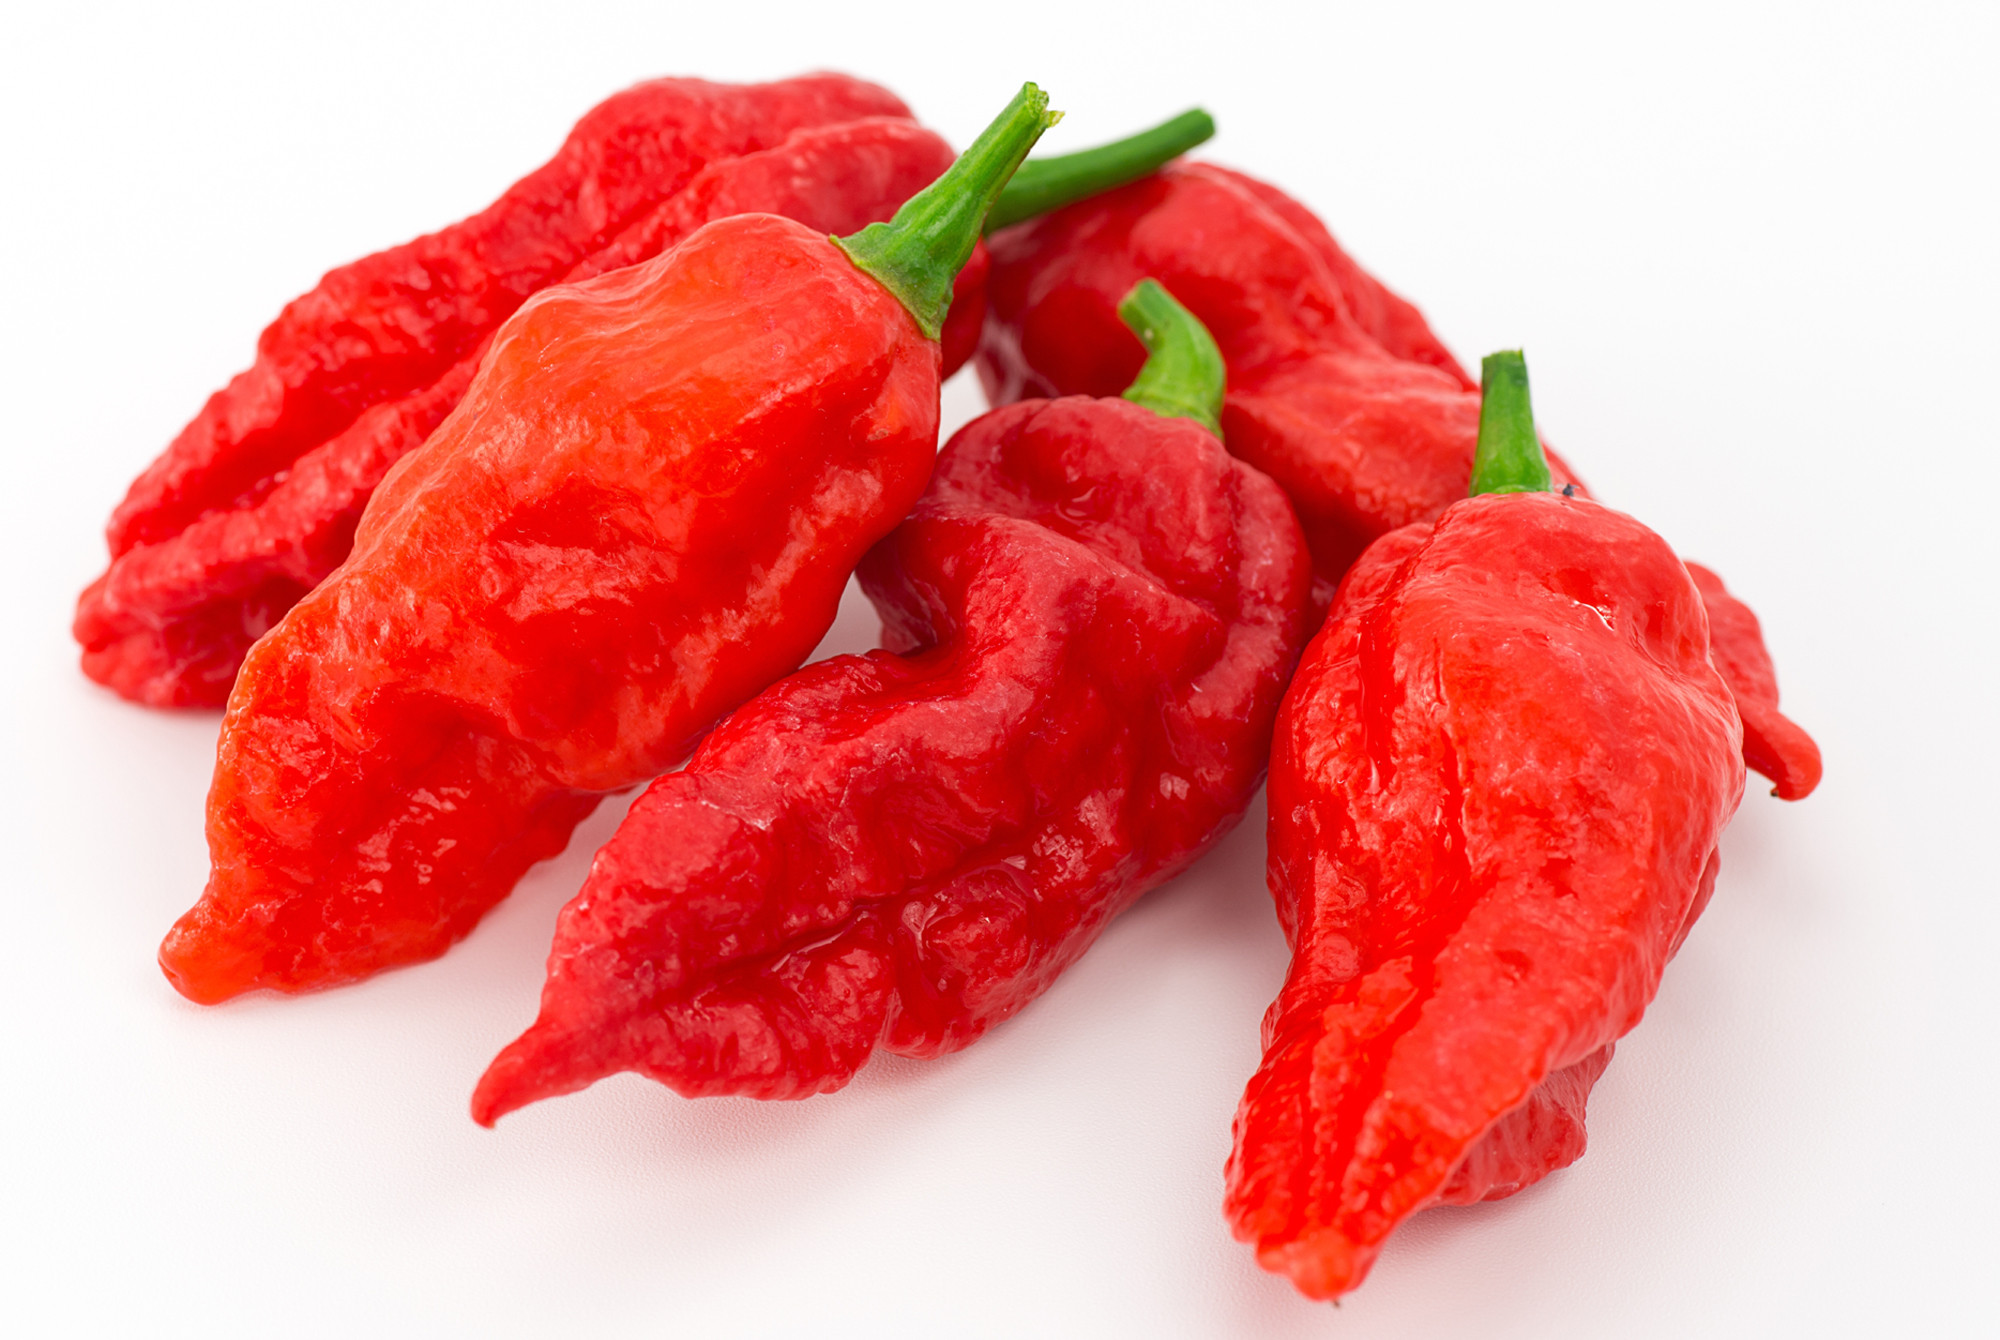 Eating Ghost Peppers Could Kill You